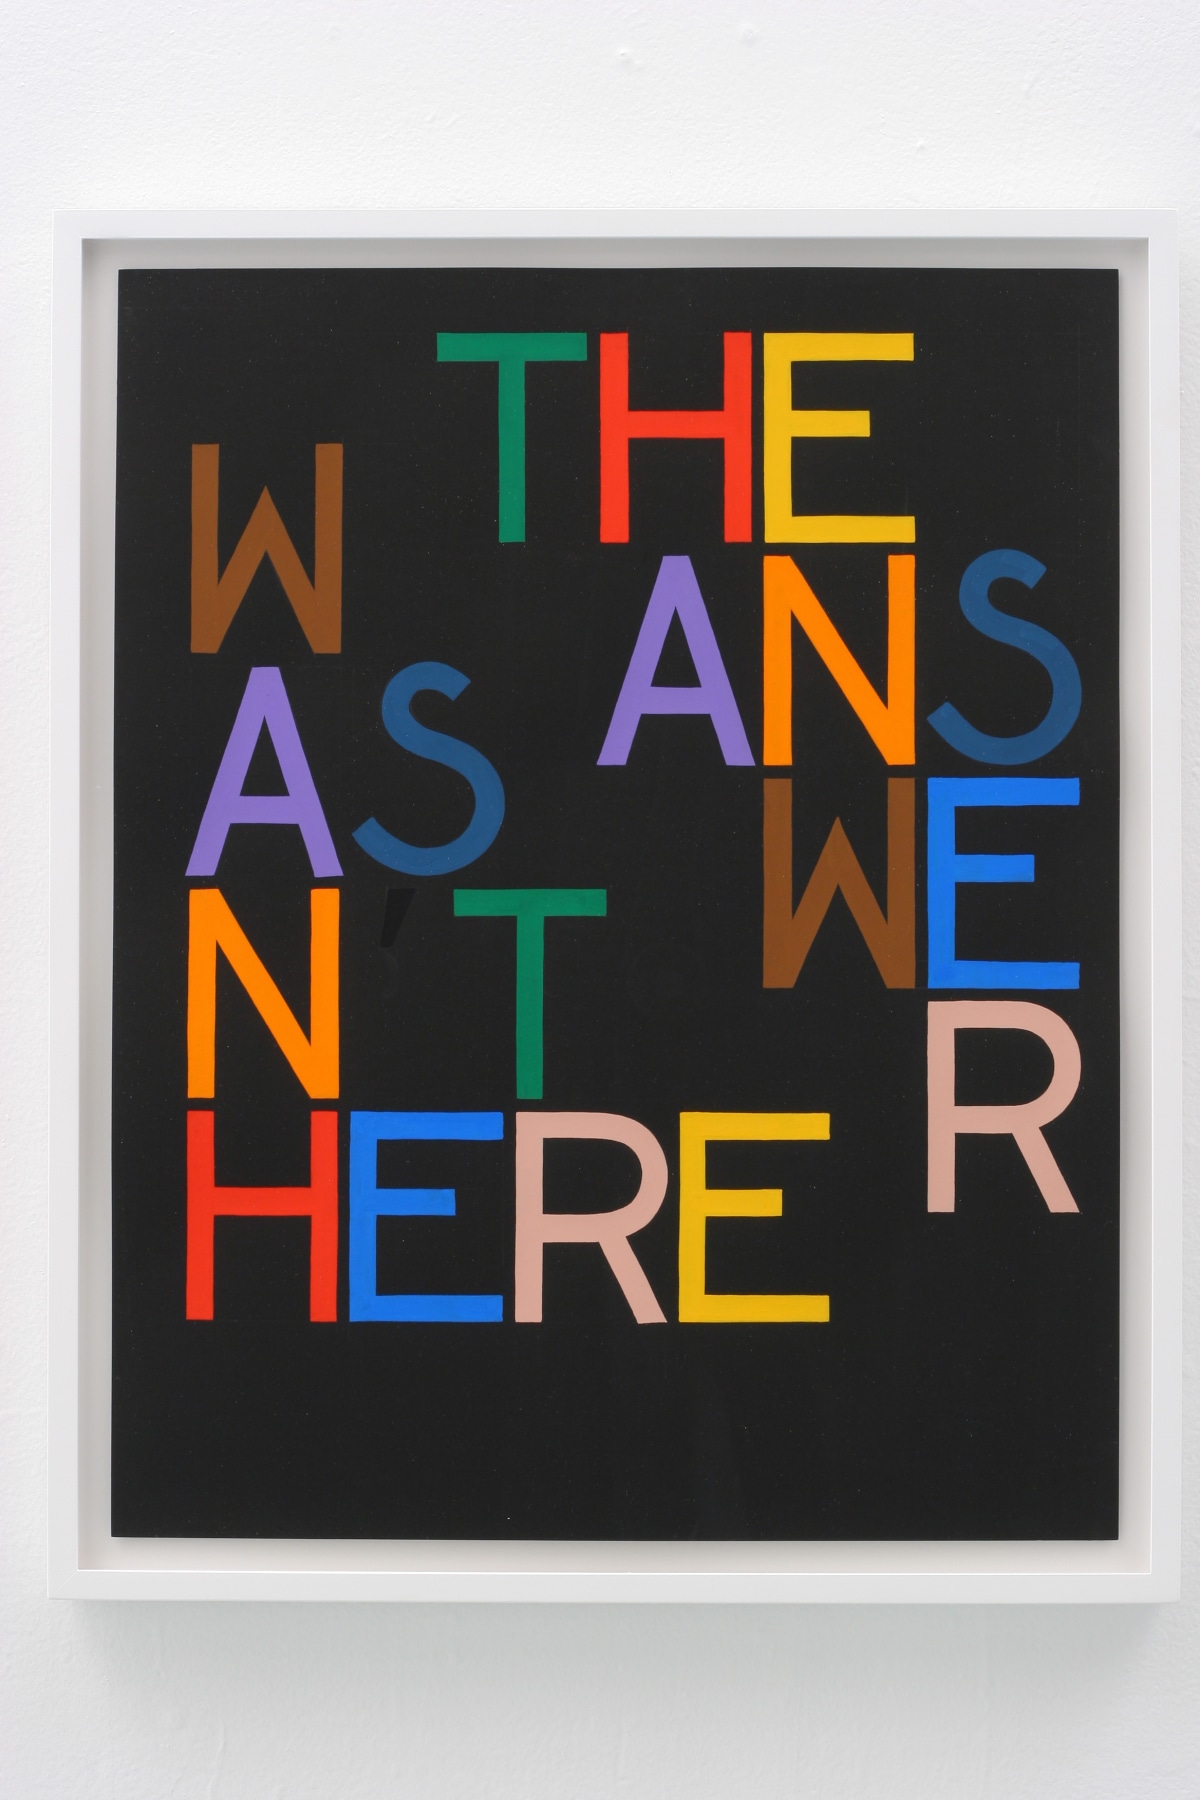 multicolored lettering on black background reading 'the answer wasn't there'